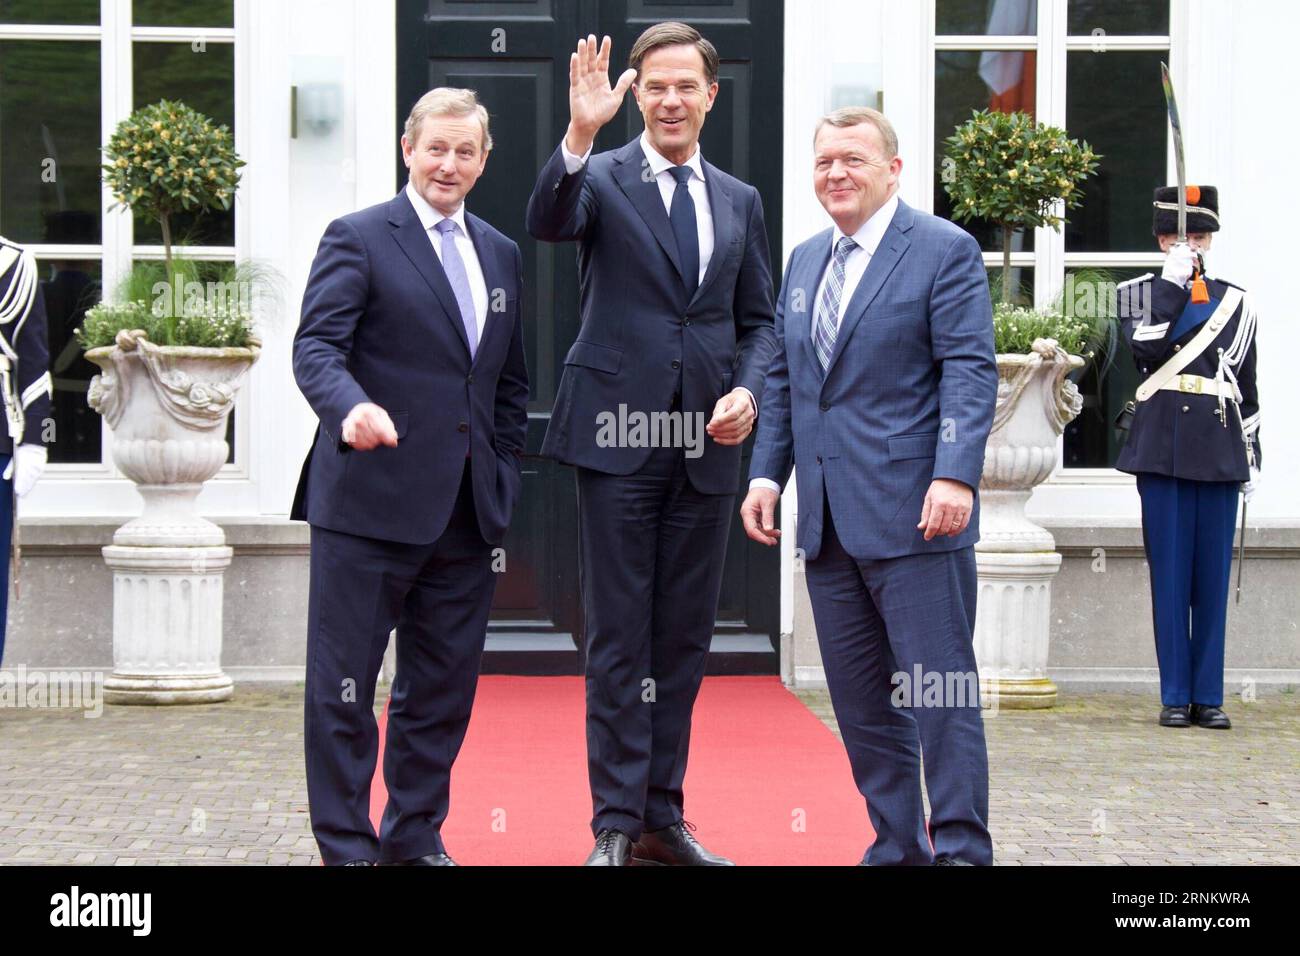 (170421) -- THE HAGUE, April 21, 2017 -- Dutch Prime Minister Mark Rutte (C) welcomes Danish Prime Minister Lars Loekke Rasmussen (R) and Irish Prime Minister Enda Kenny in The Hague, the Netherlands, on April 21, 2017. Dutch Prime Minister Mark Rutte met with Danish Prime Minister Lars Loekke Rasmussen and Irish Prime Minister Enda Kenny here on Friday to discuss current European issues, including Brexit negotiations. ) THE NETHERLANDS-THE HAGUE-DANMARK-IRELAND-PM-MEETING SylviaxLederer PUBLICATIONxNOTxINxCHN   The Hague April 21 2017 Dutch Prime Ministers Mark Rutte C welcomes Danish Prime M Stock Photo